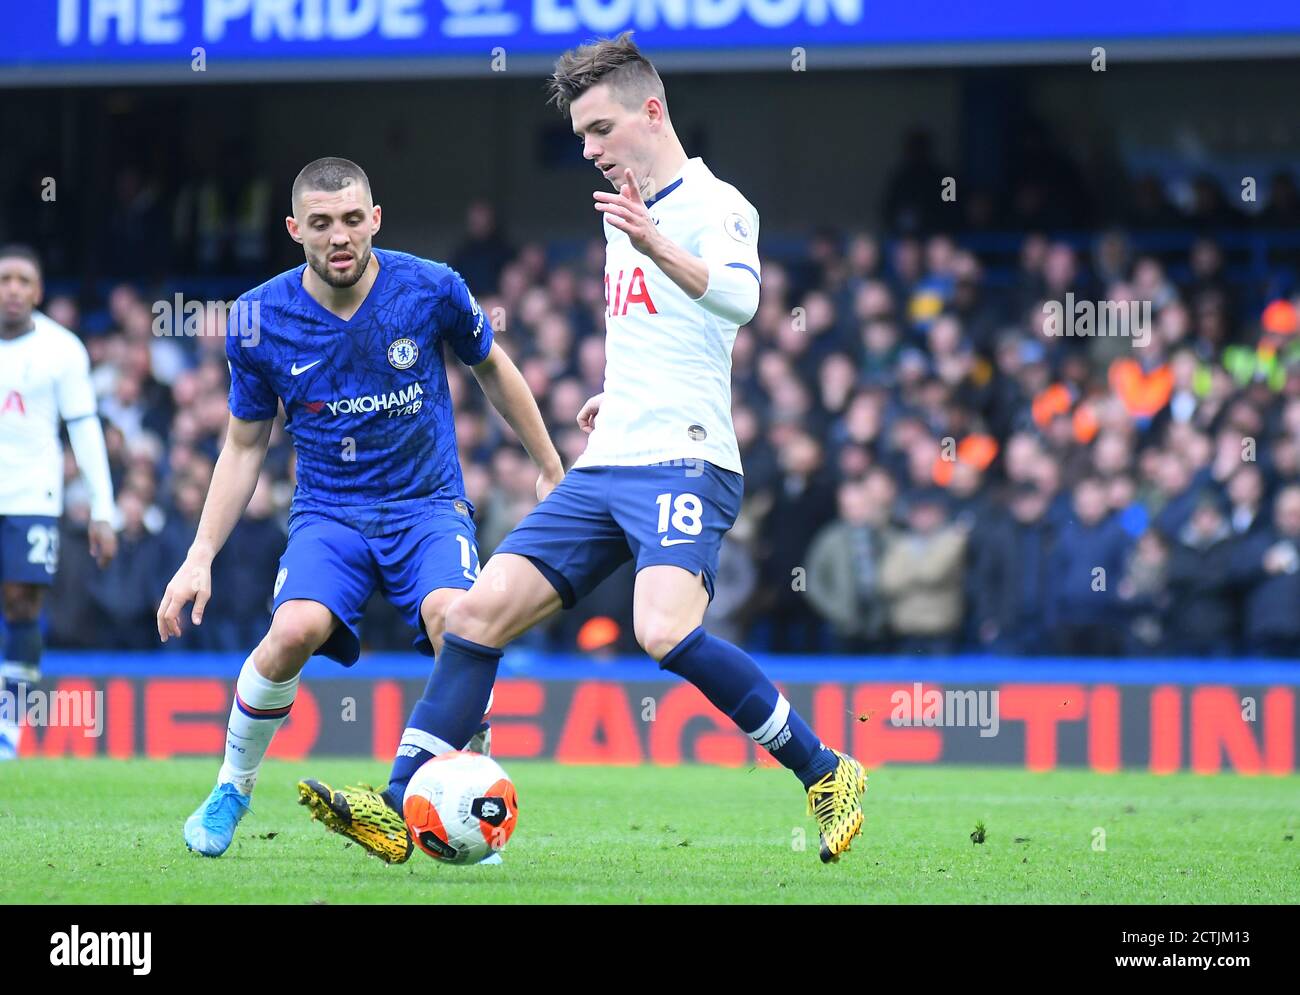 LONDON, ENGLAND - FEBRUARY 22, 2020: Mateo Kovacic of Chelsea and Giovani Lo Celso of Tottenham pictured during the 2019/20 Premier League game between Chelsea FC and Tottenham Hotspur FC at Stamford Bridge. Stock Photo